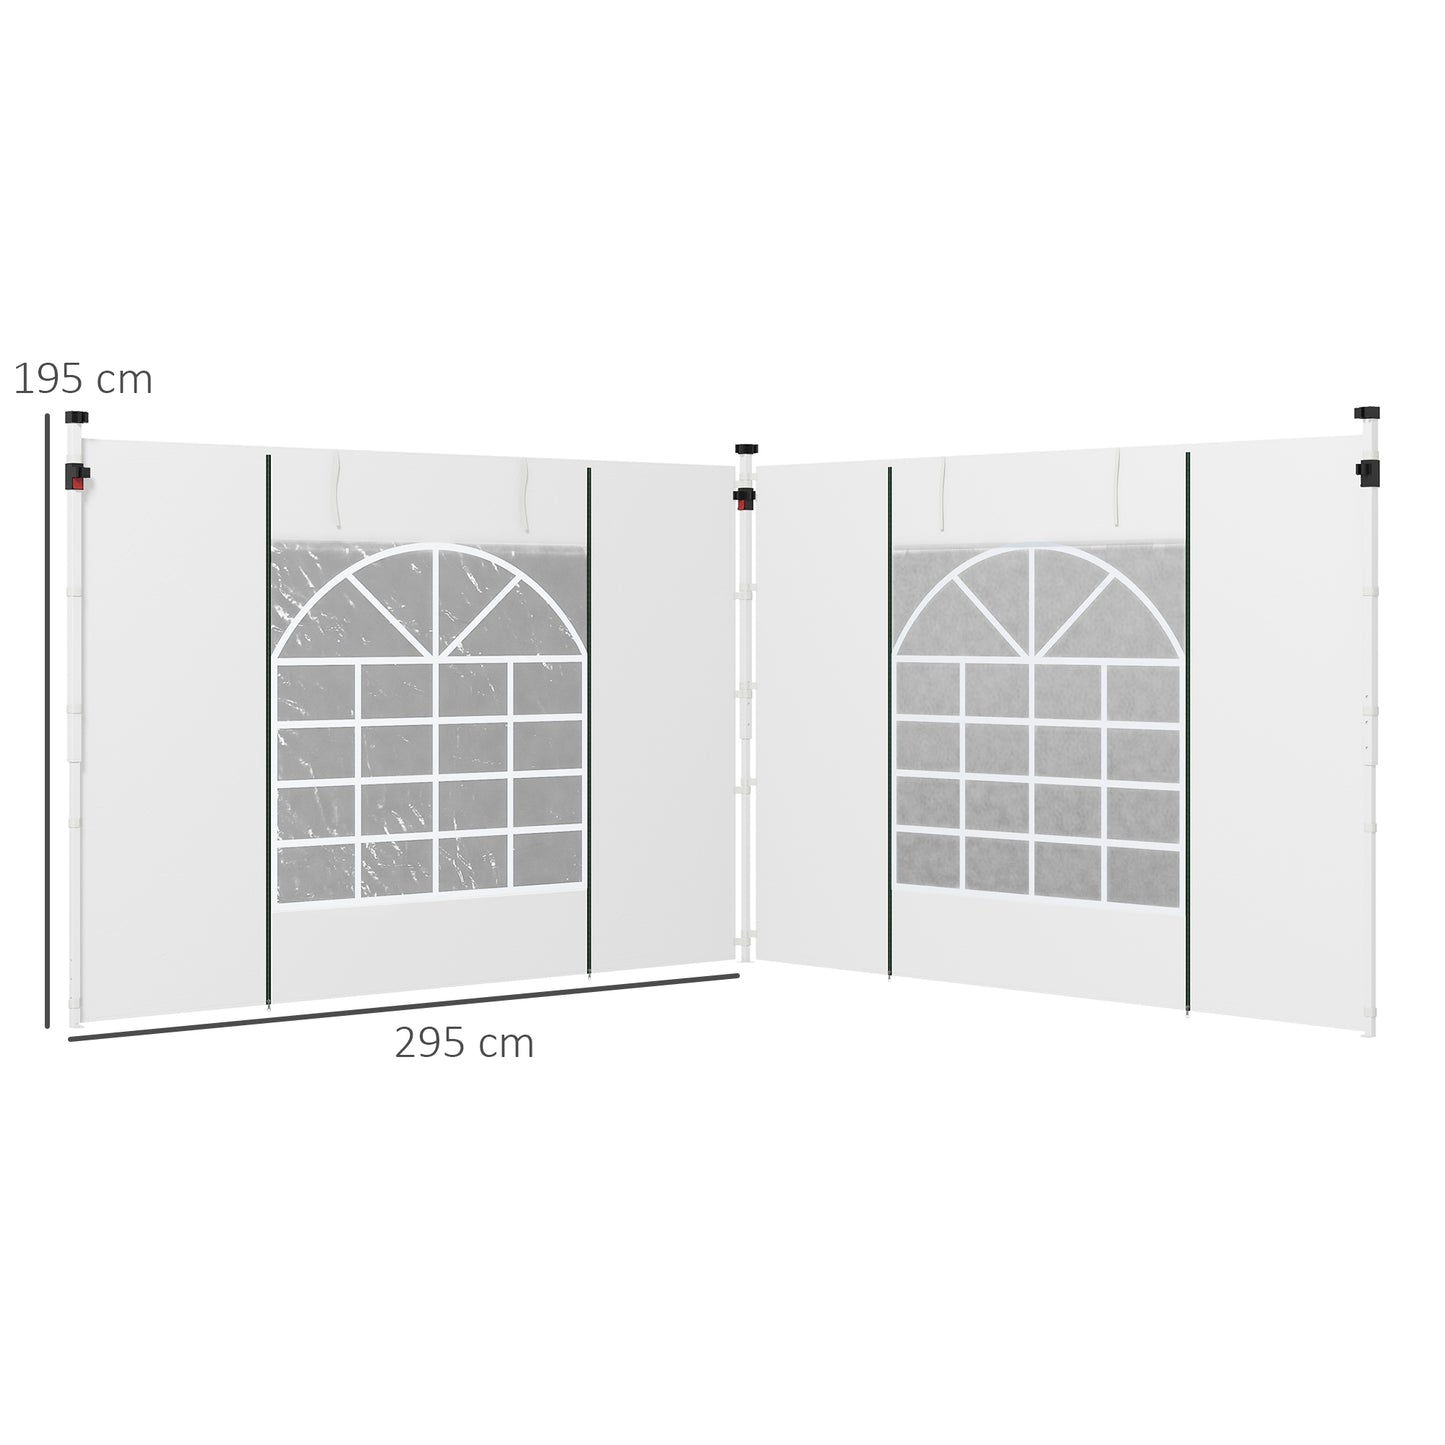 Outsunny Replacement Gazebo Side Panels with Windows and Doors, 2 Pack, for 3x3(m) or 3x6m Pop Up Gazebo, White